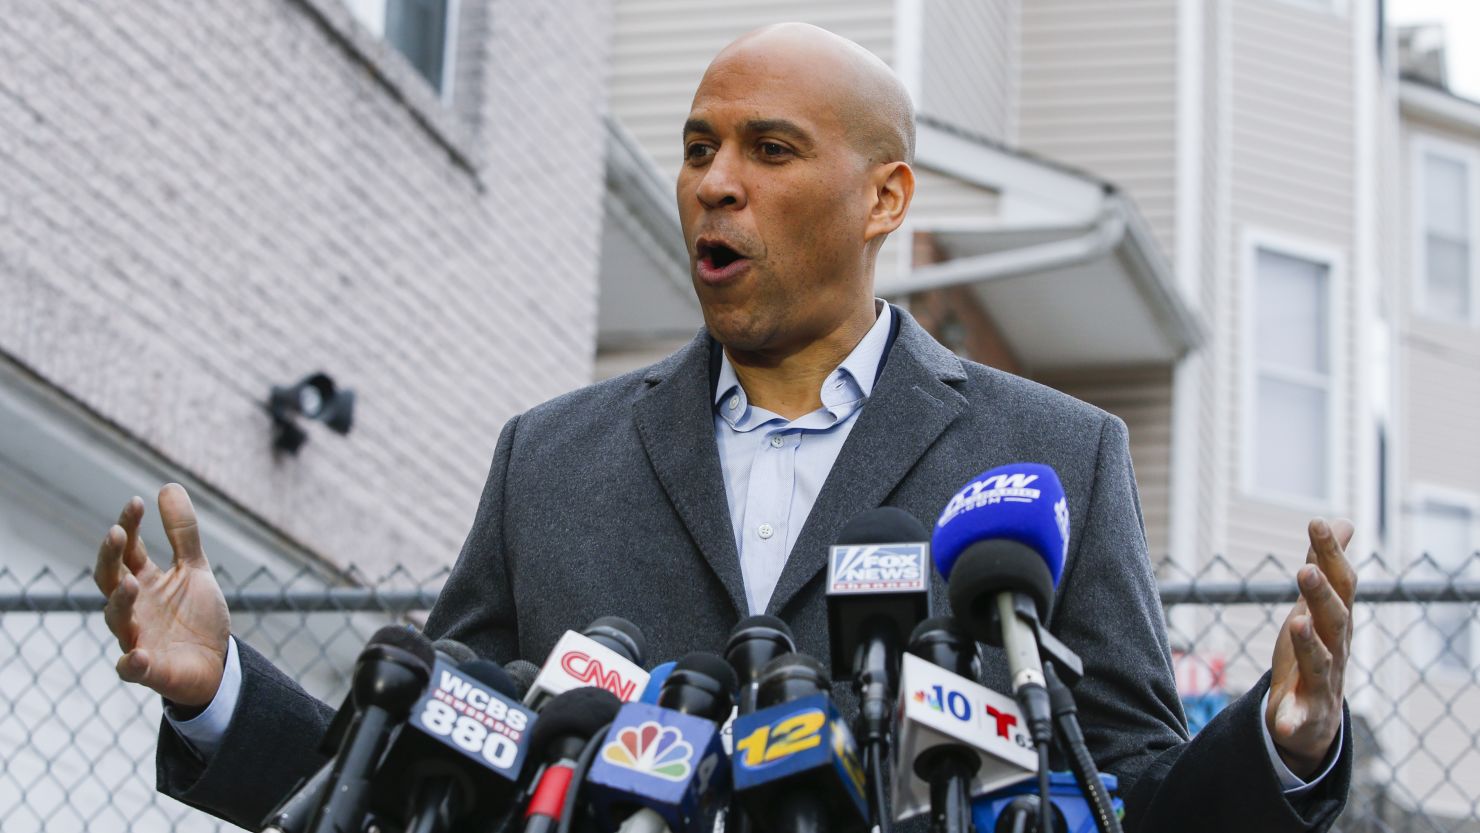 Sen. Cory Booker (D-NJ) announces his presidential bid during a press conference on February 1, 2019 in Newark, New Jersey. 